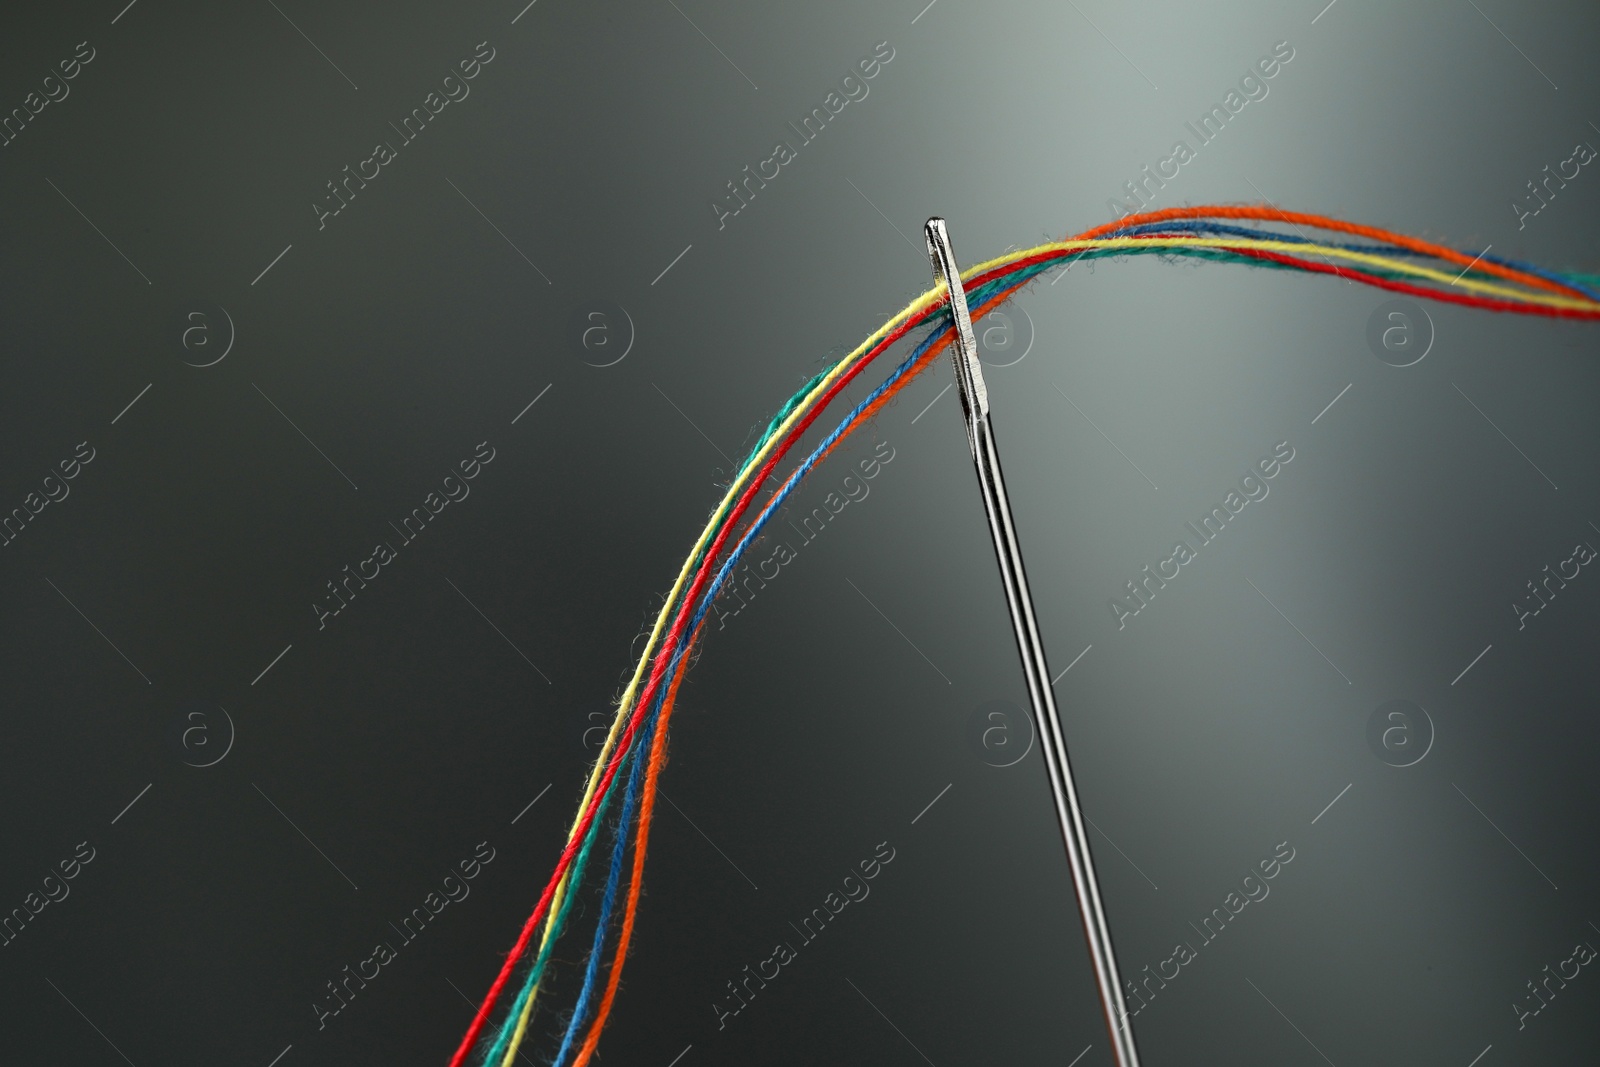 Photo of Sewing needle with colorful threads on dark background, space for text